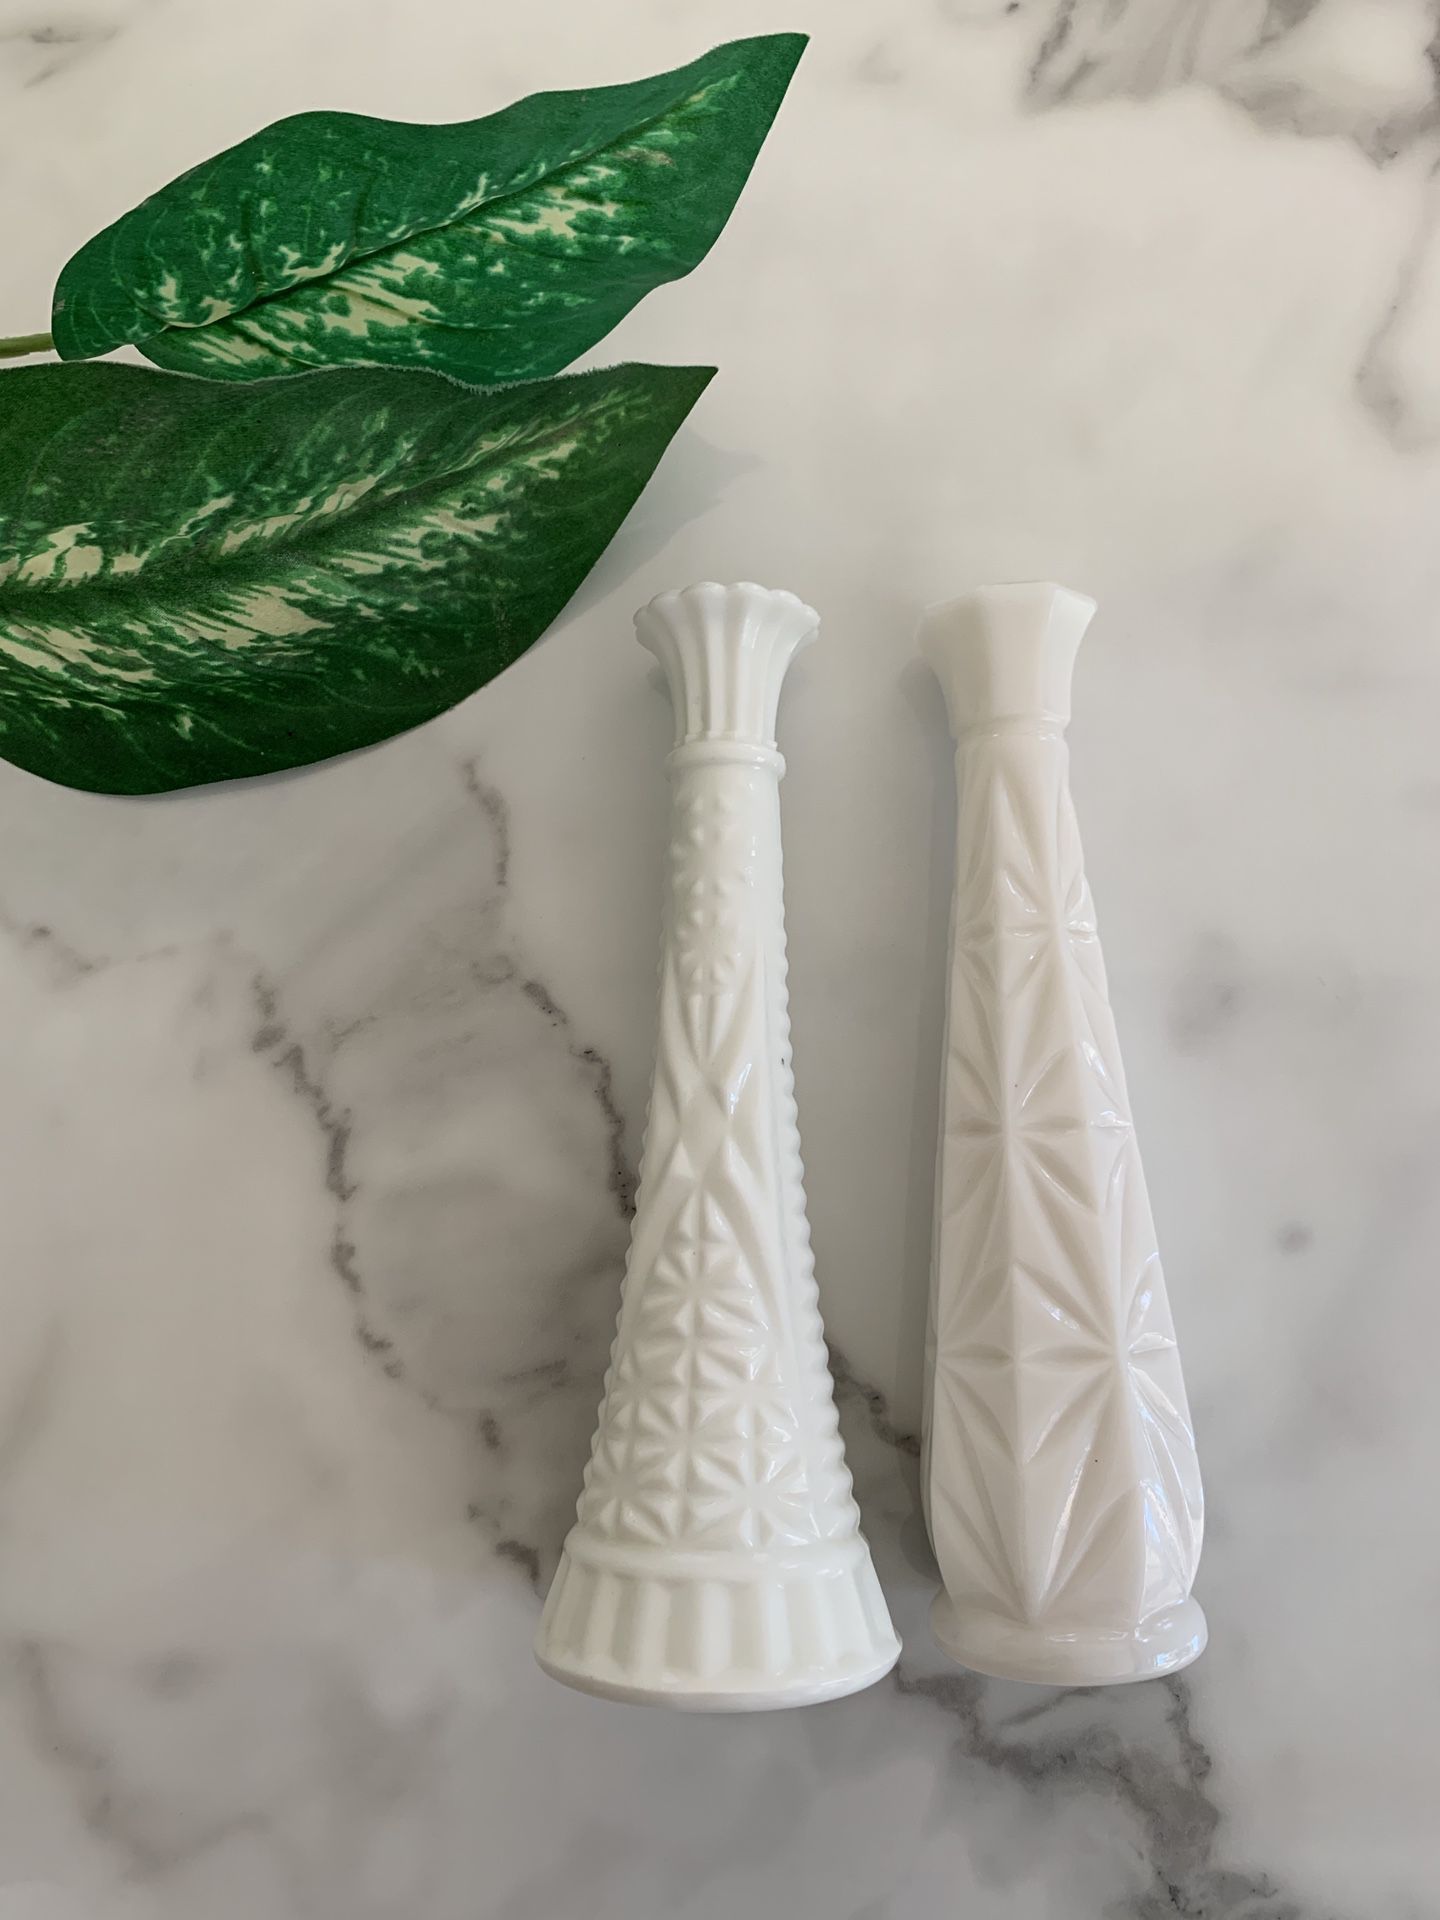 Milk glass vases decorative for home or wedding